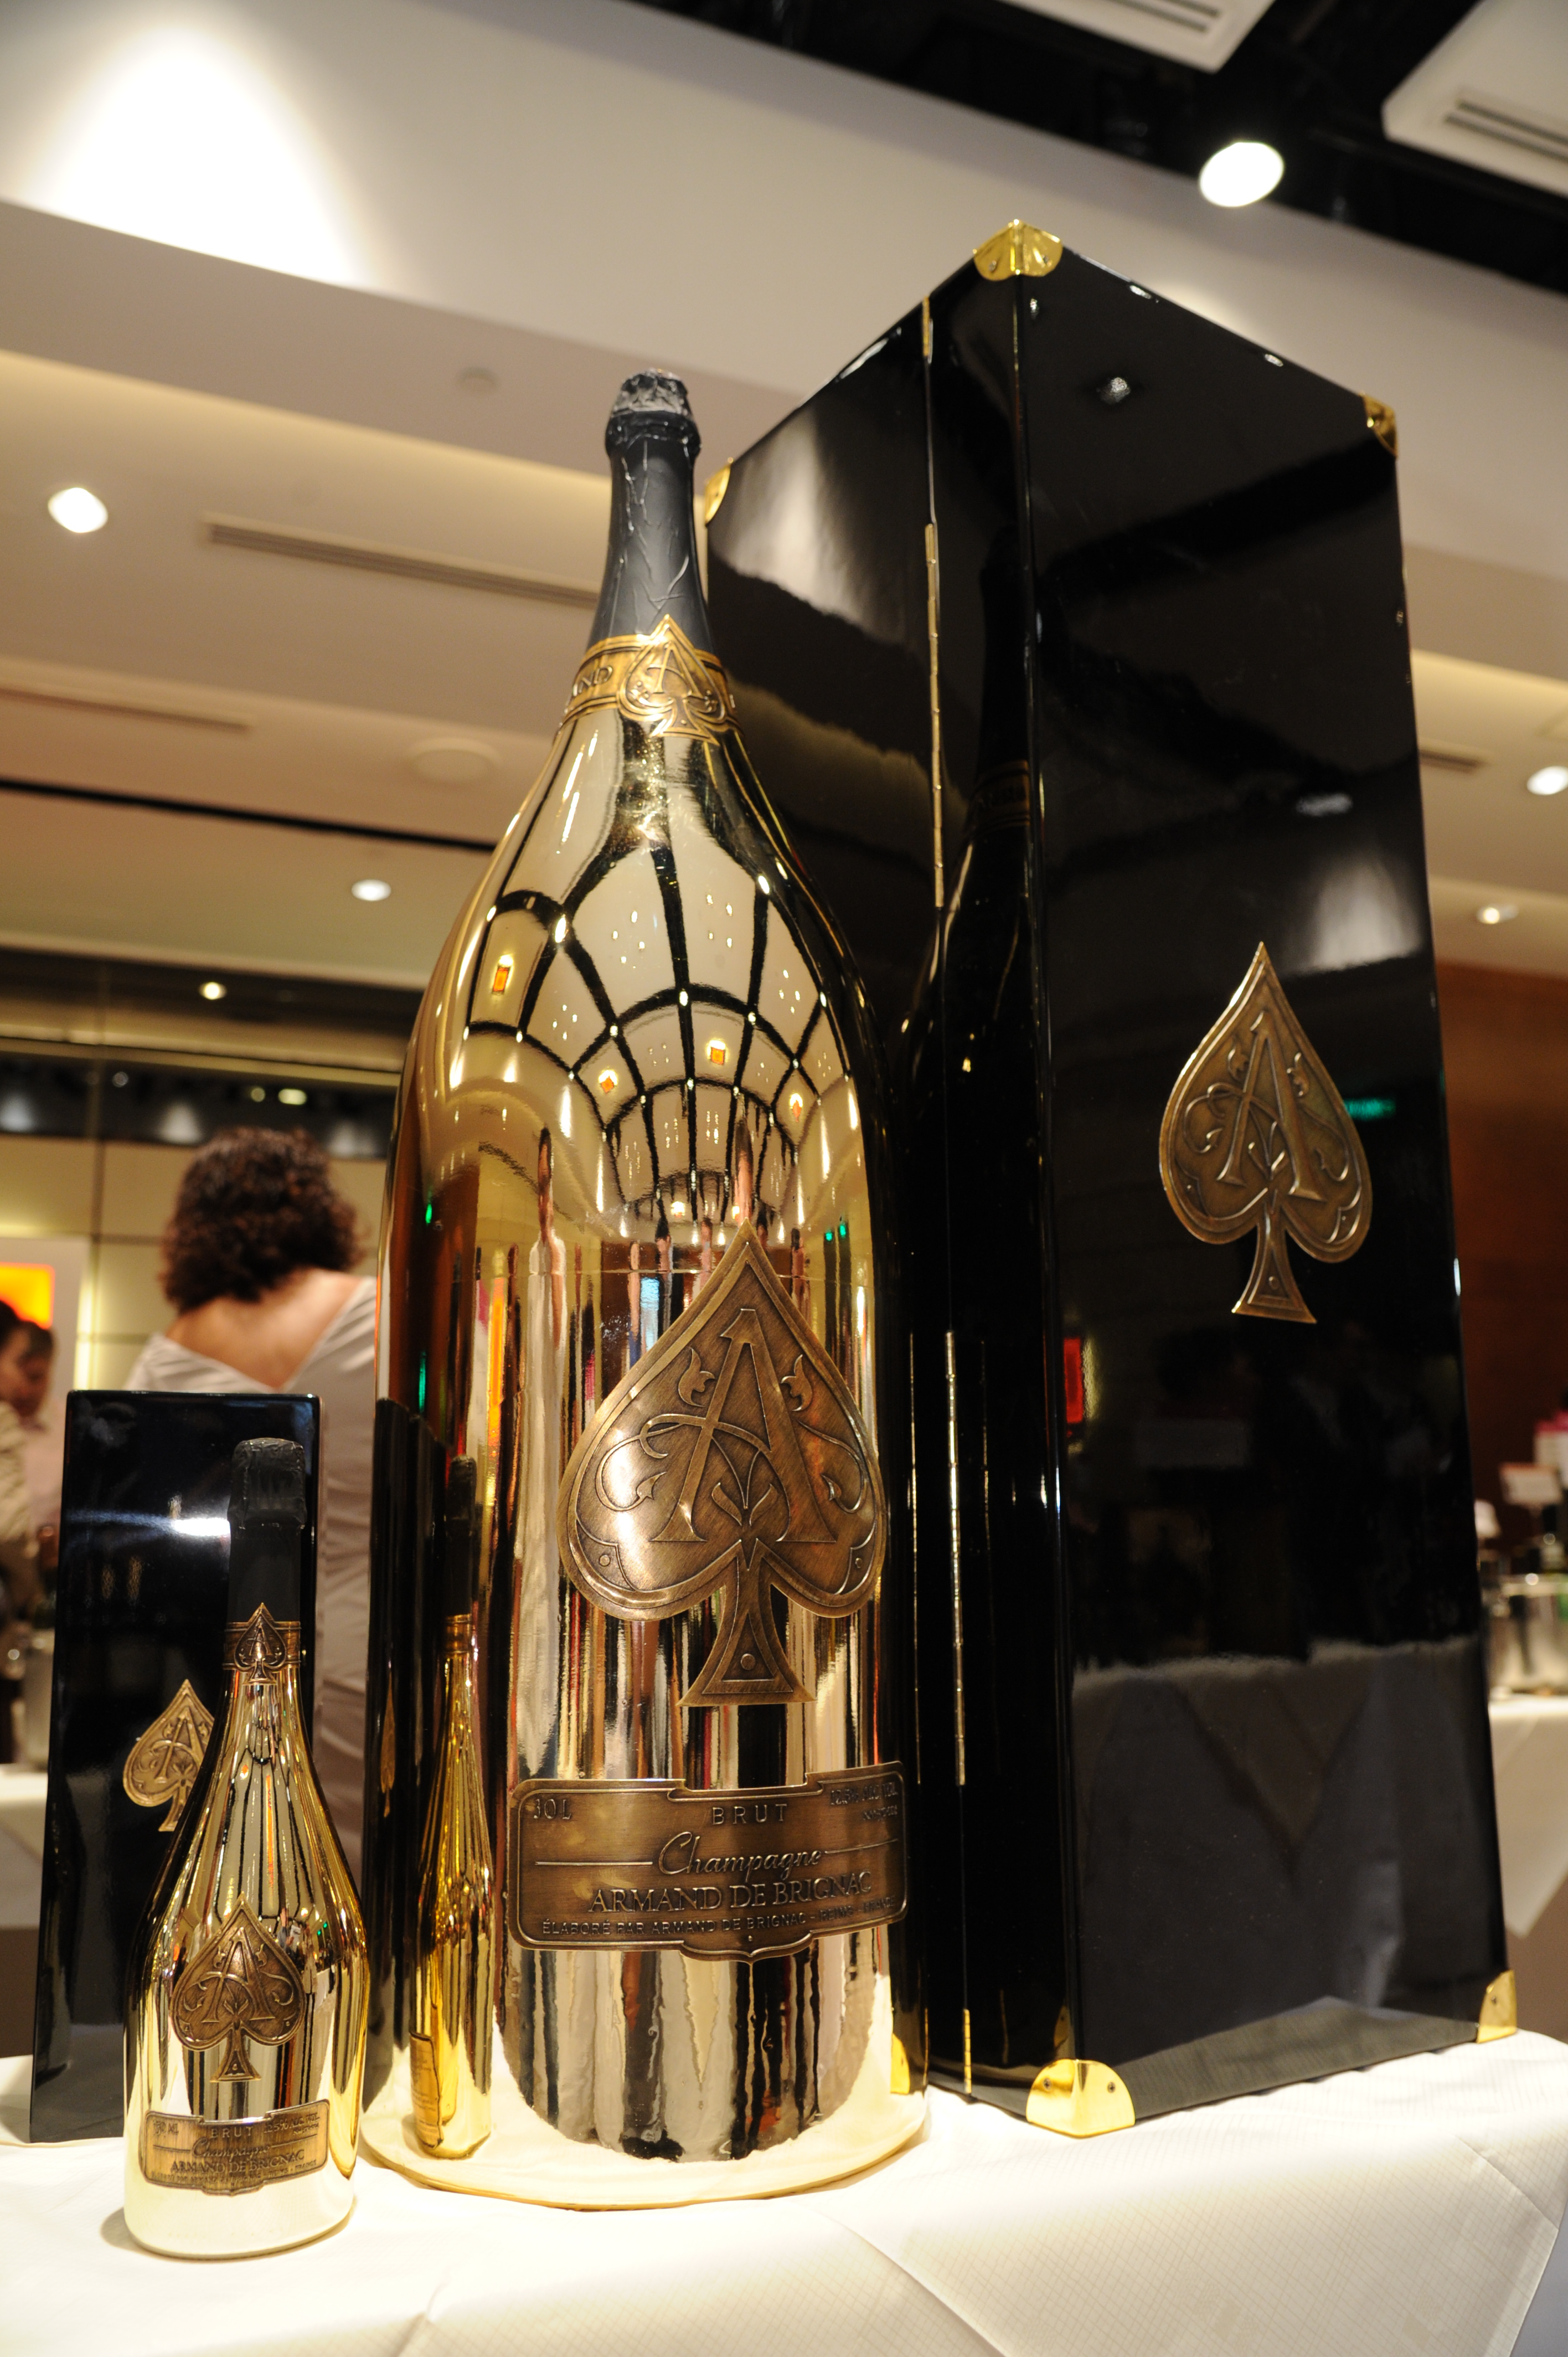 XAVIER LOUIS VUITTON LAUNCHES WINES IN CHINA